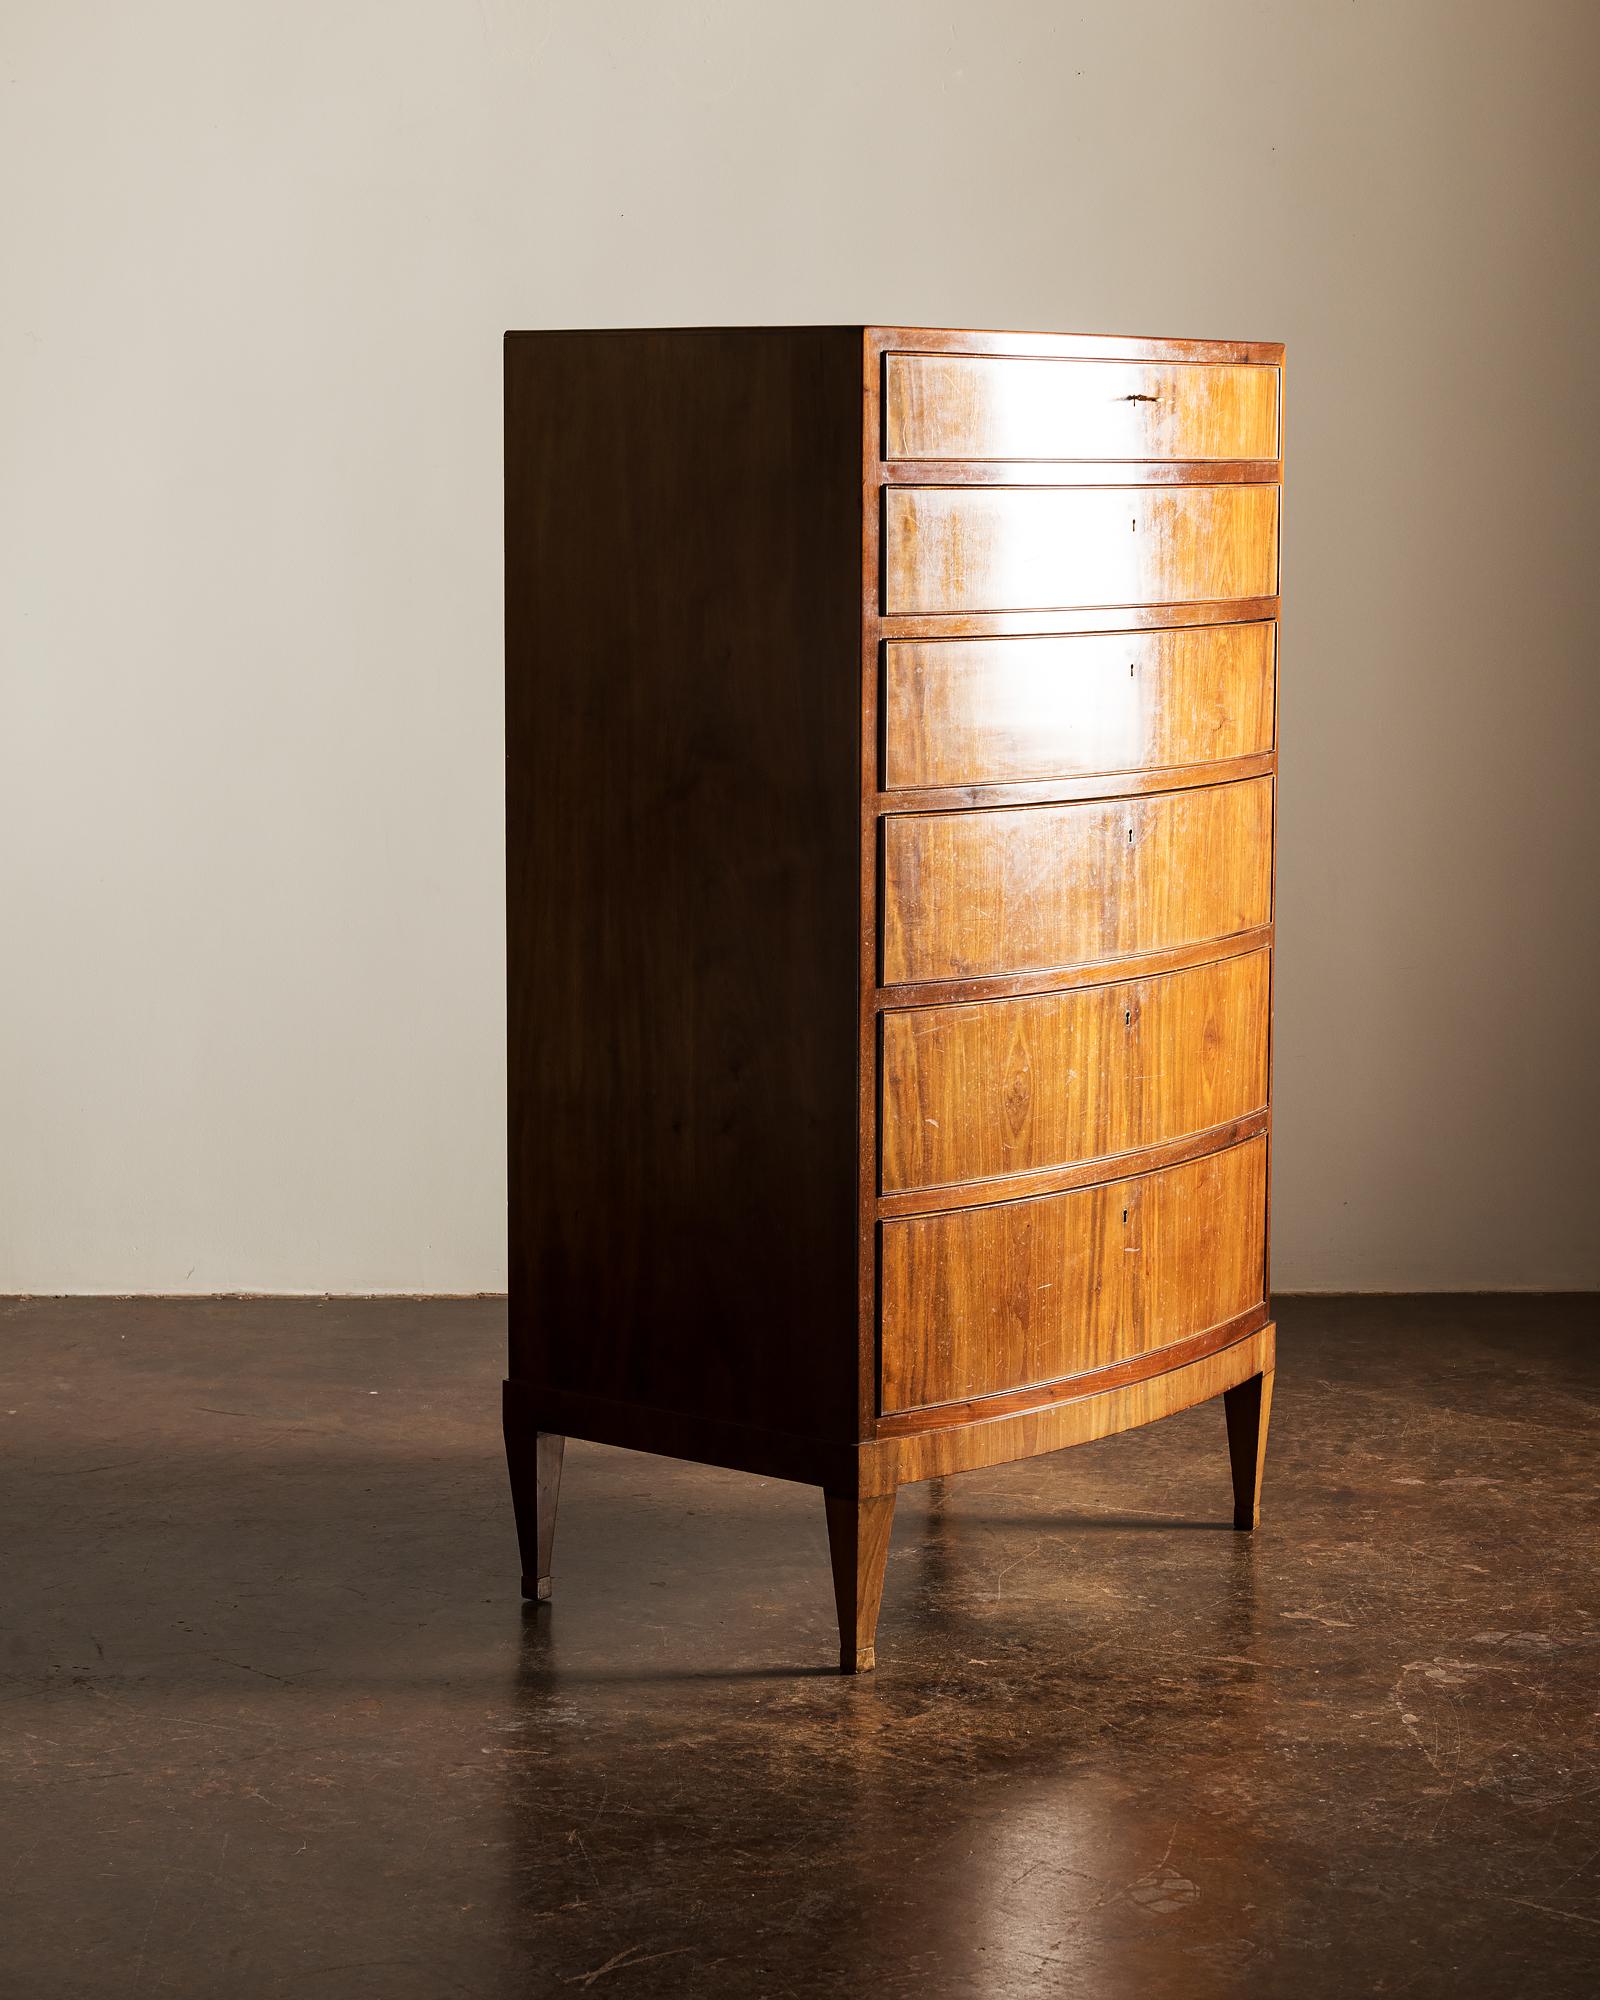 A gorgeous tall chest with elegant, simple lines in mahogany by Danish Cabinetmaker, Frits Henningsen. original key included.